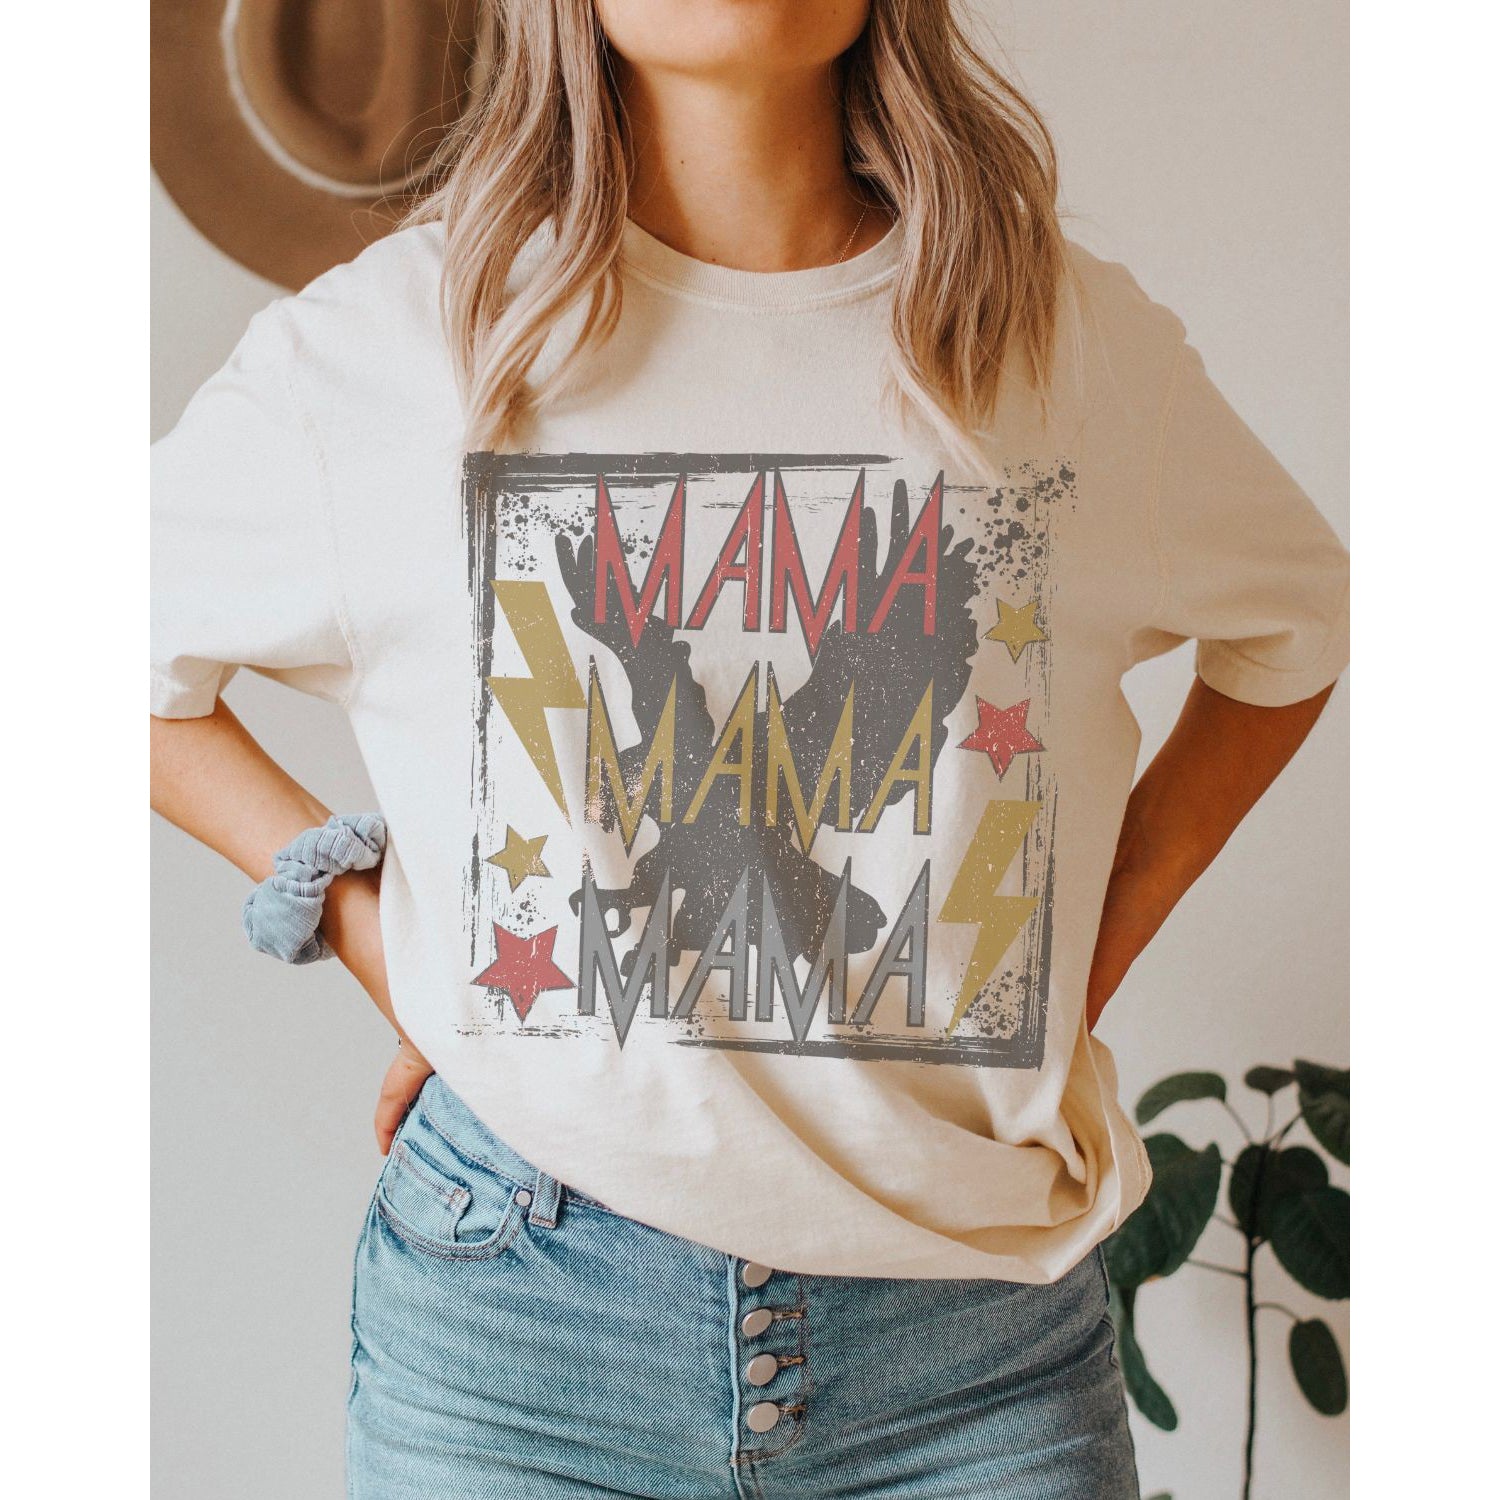 at Noon Mama Vintage Oversized Graphic Tee -Cream S